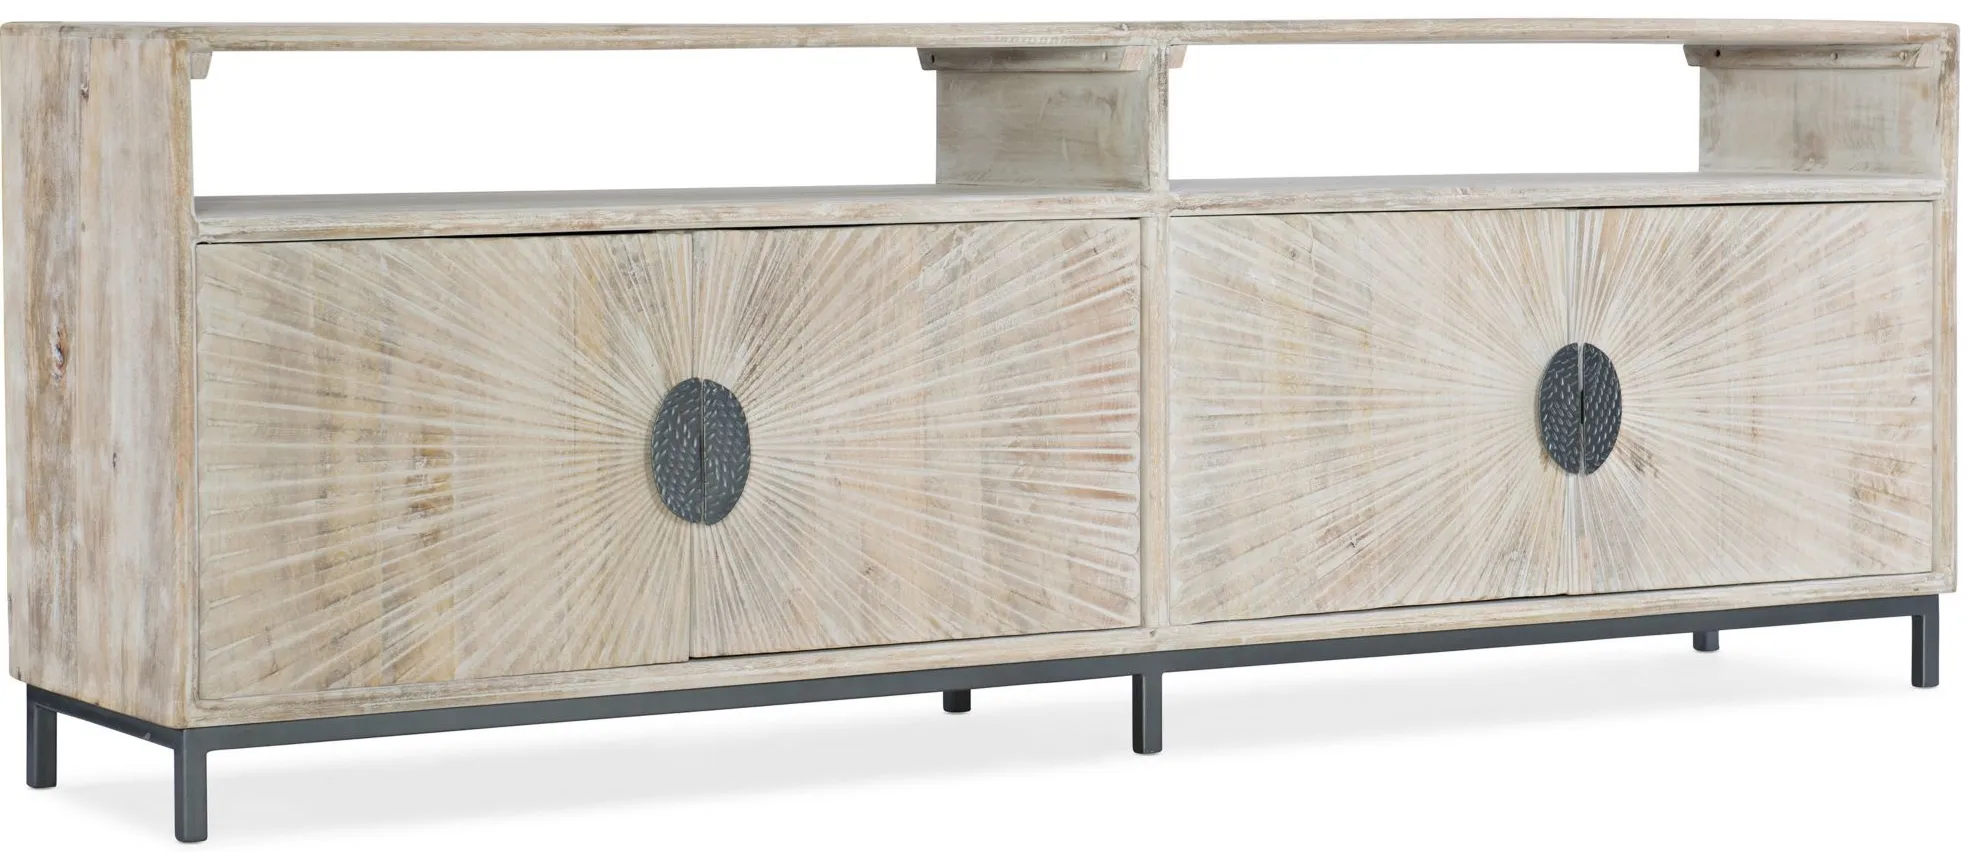 Door Entertainment Console in White by Hooker Furniture